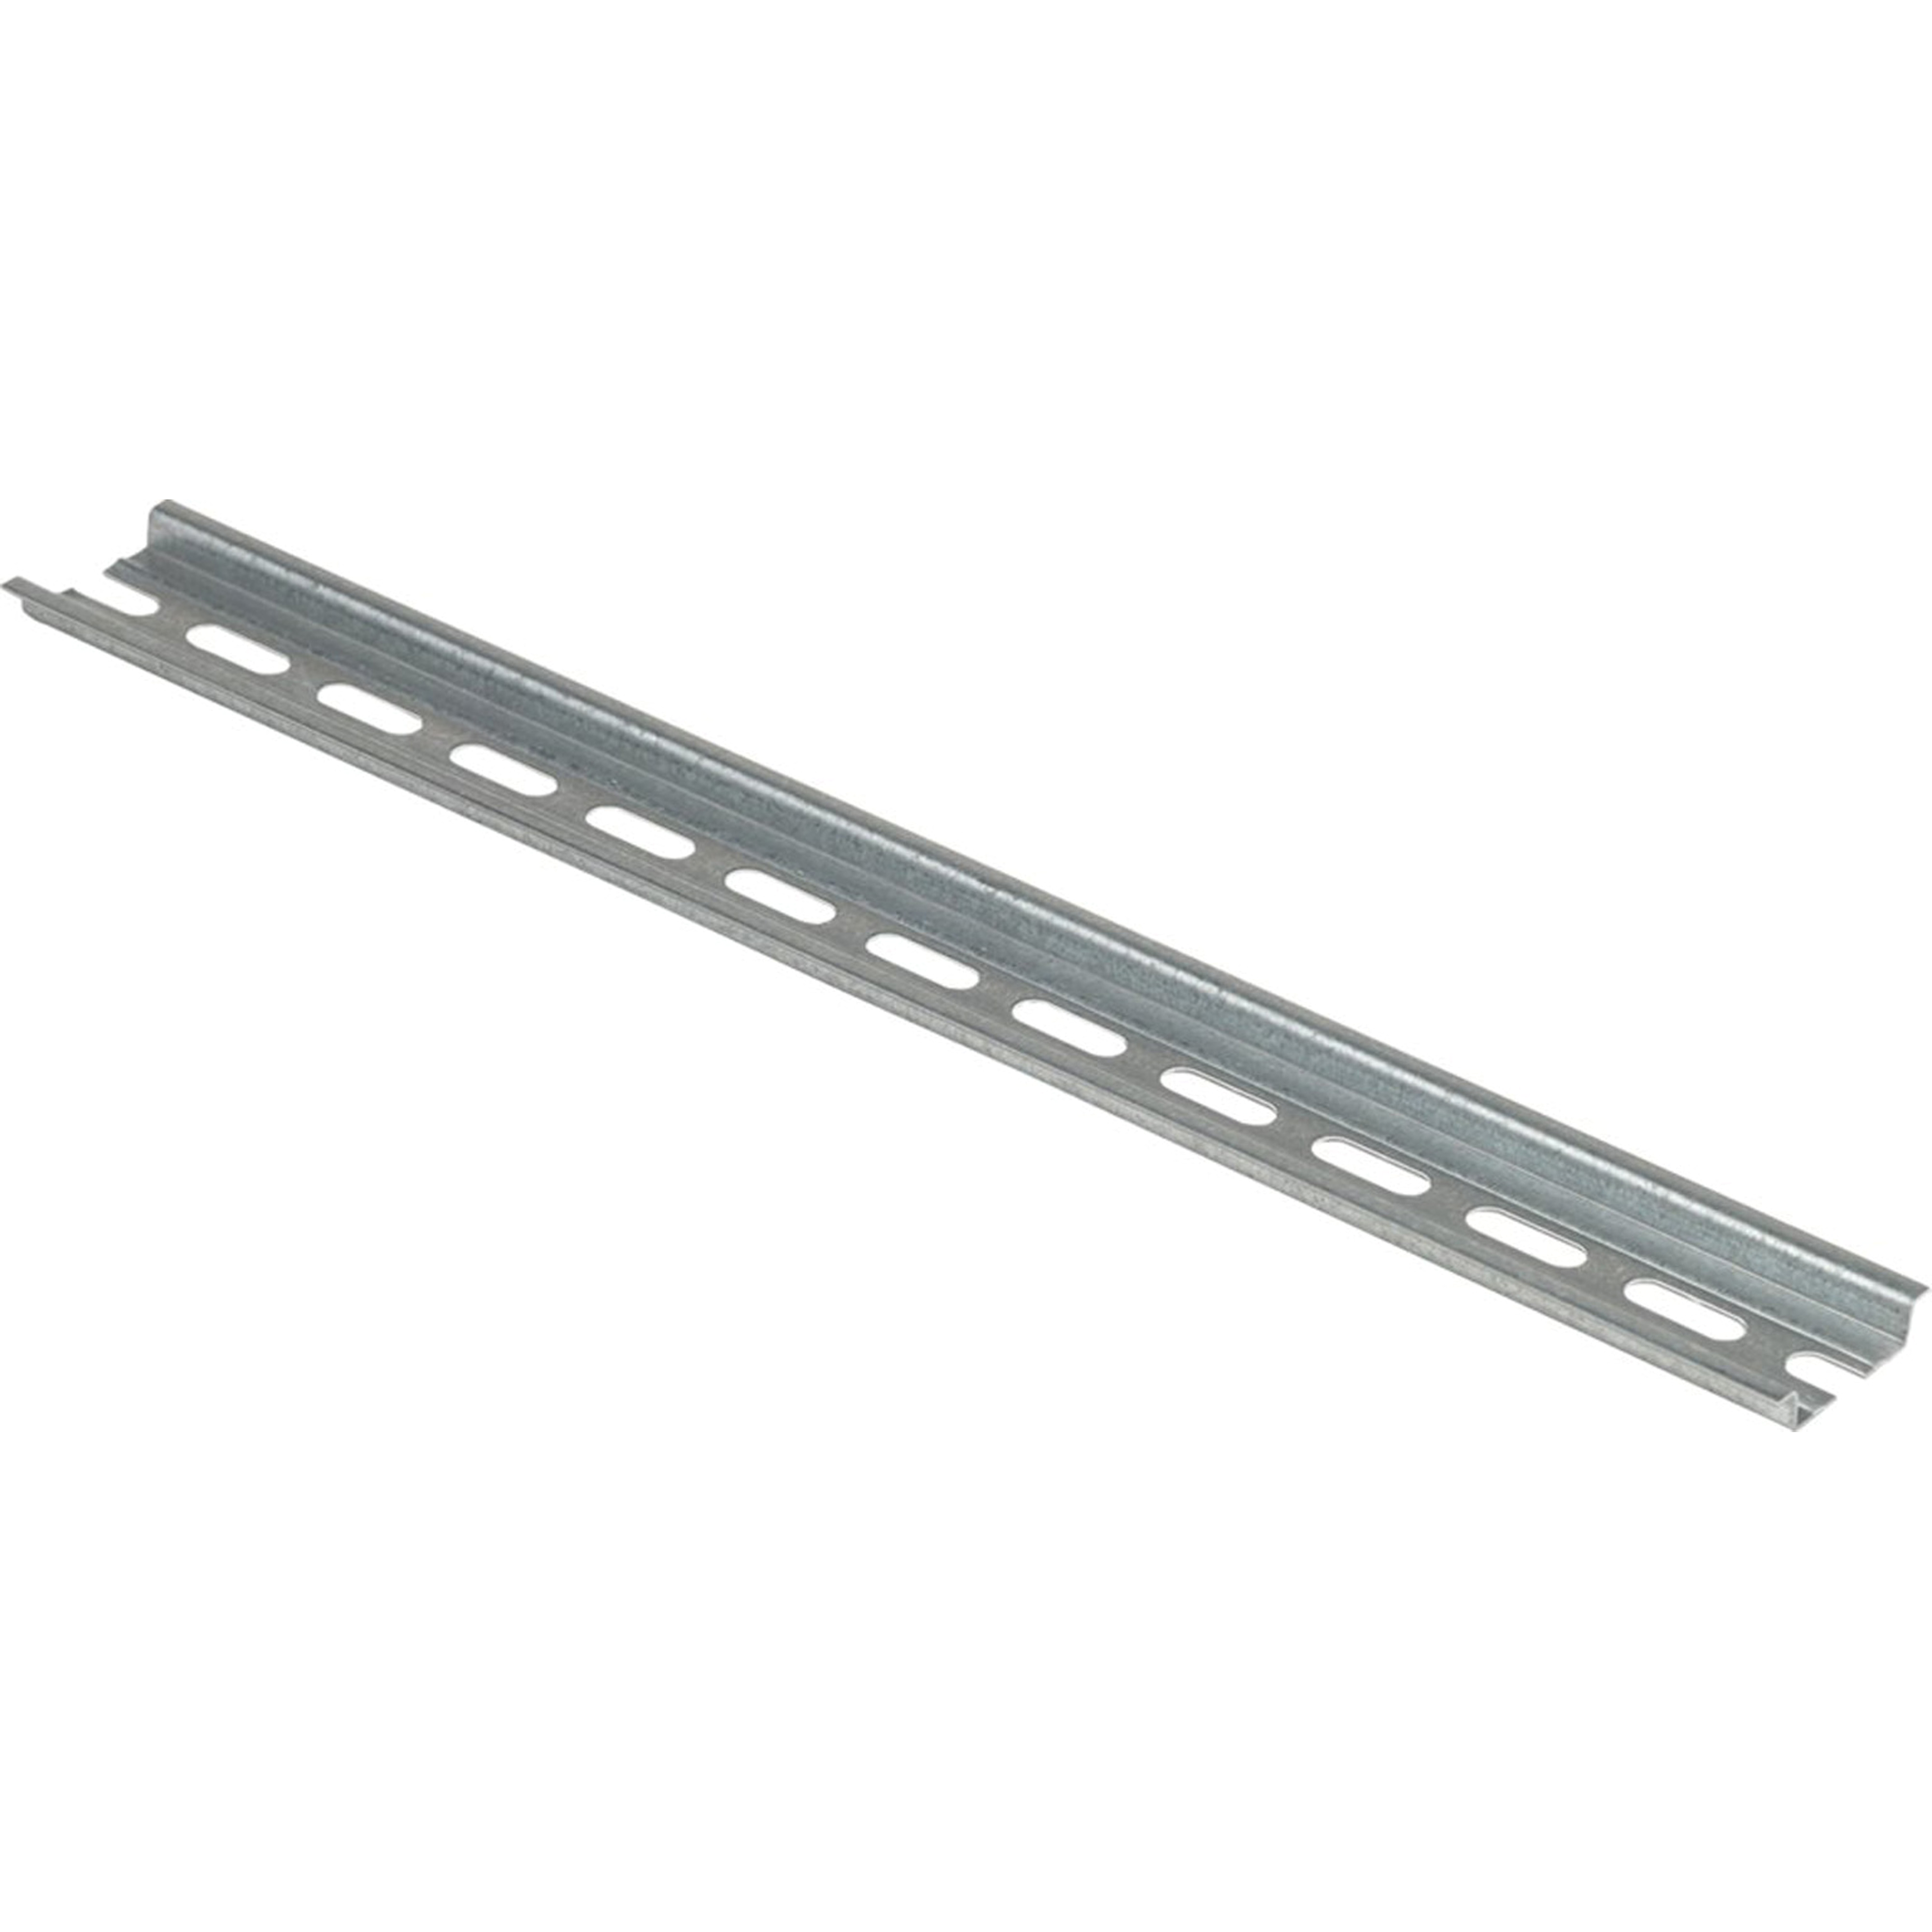 Terminal block, Linergy, mounting track, 35 mm DIN rail, with slotted mounting holes, 14 inches long